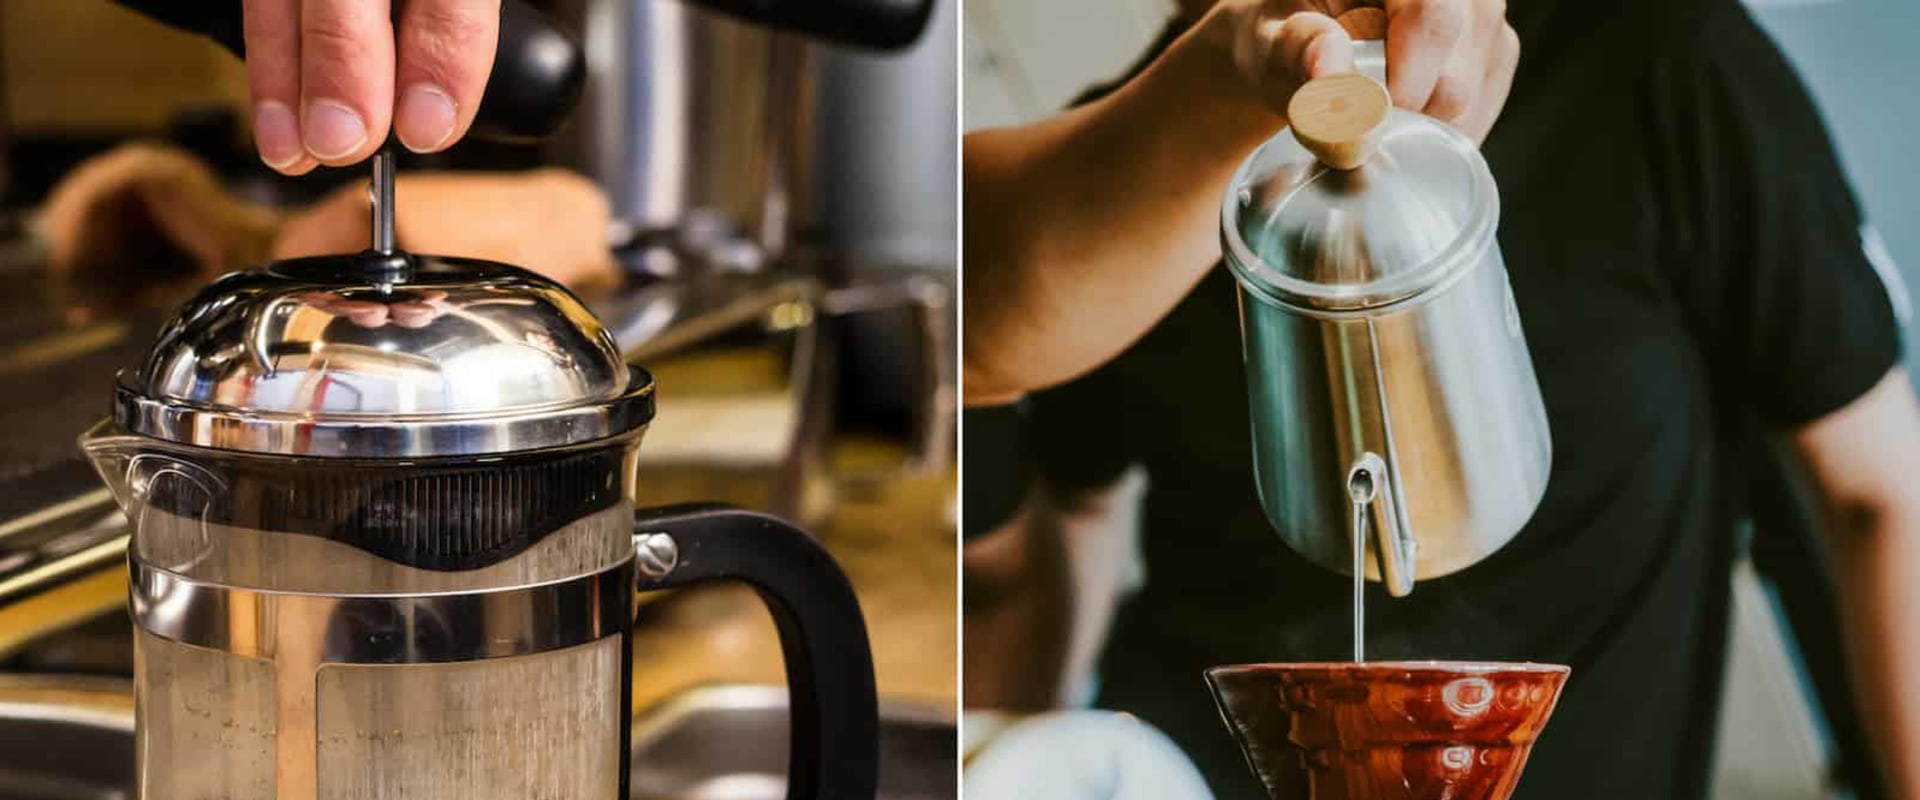 How is french press coffee different than regular coffee?